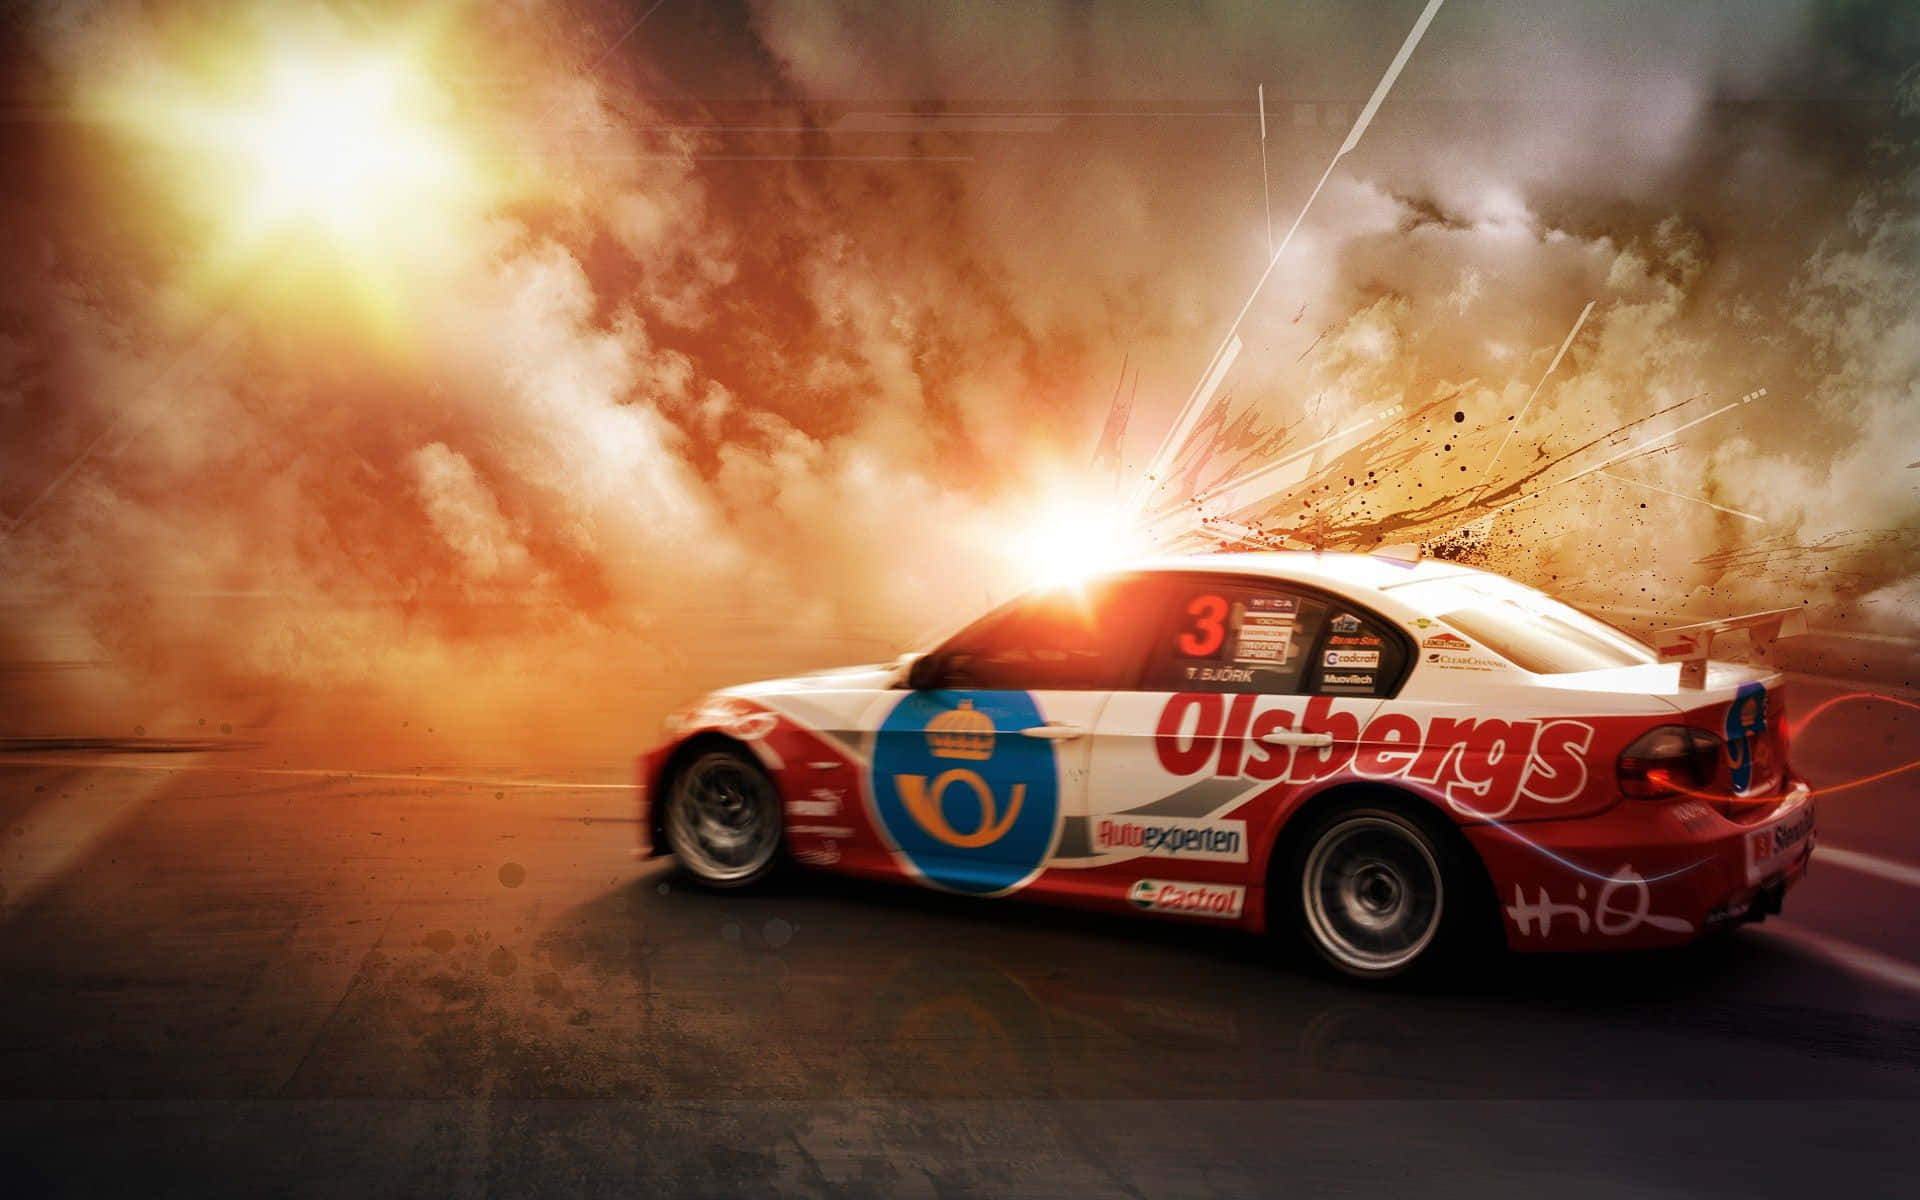 High-Speed Car Racing Action in a Futuristic Setting Wallpaper